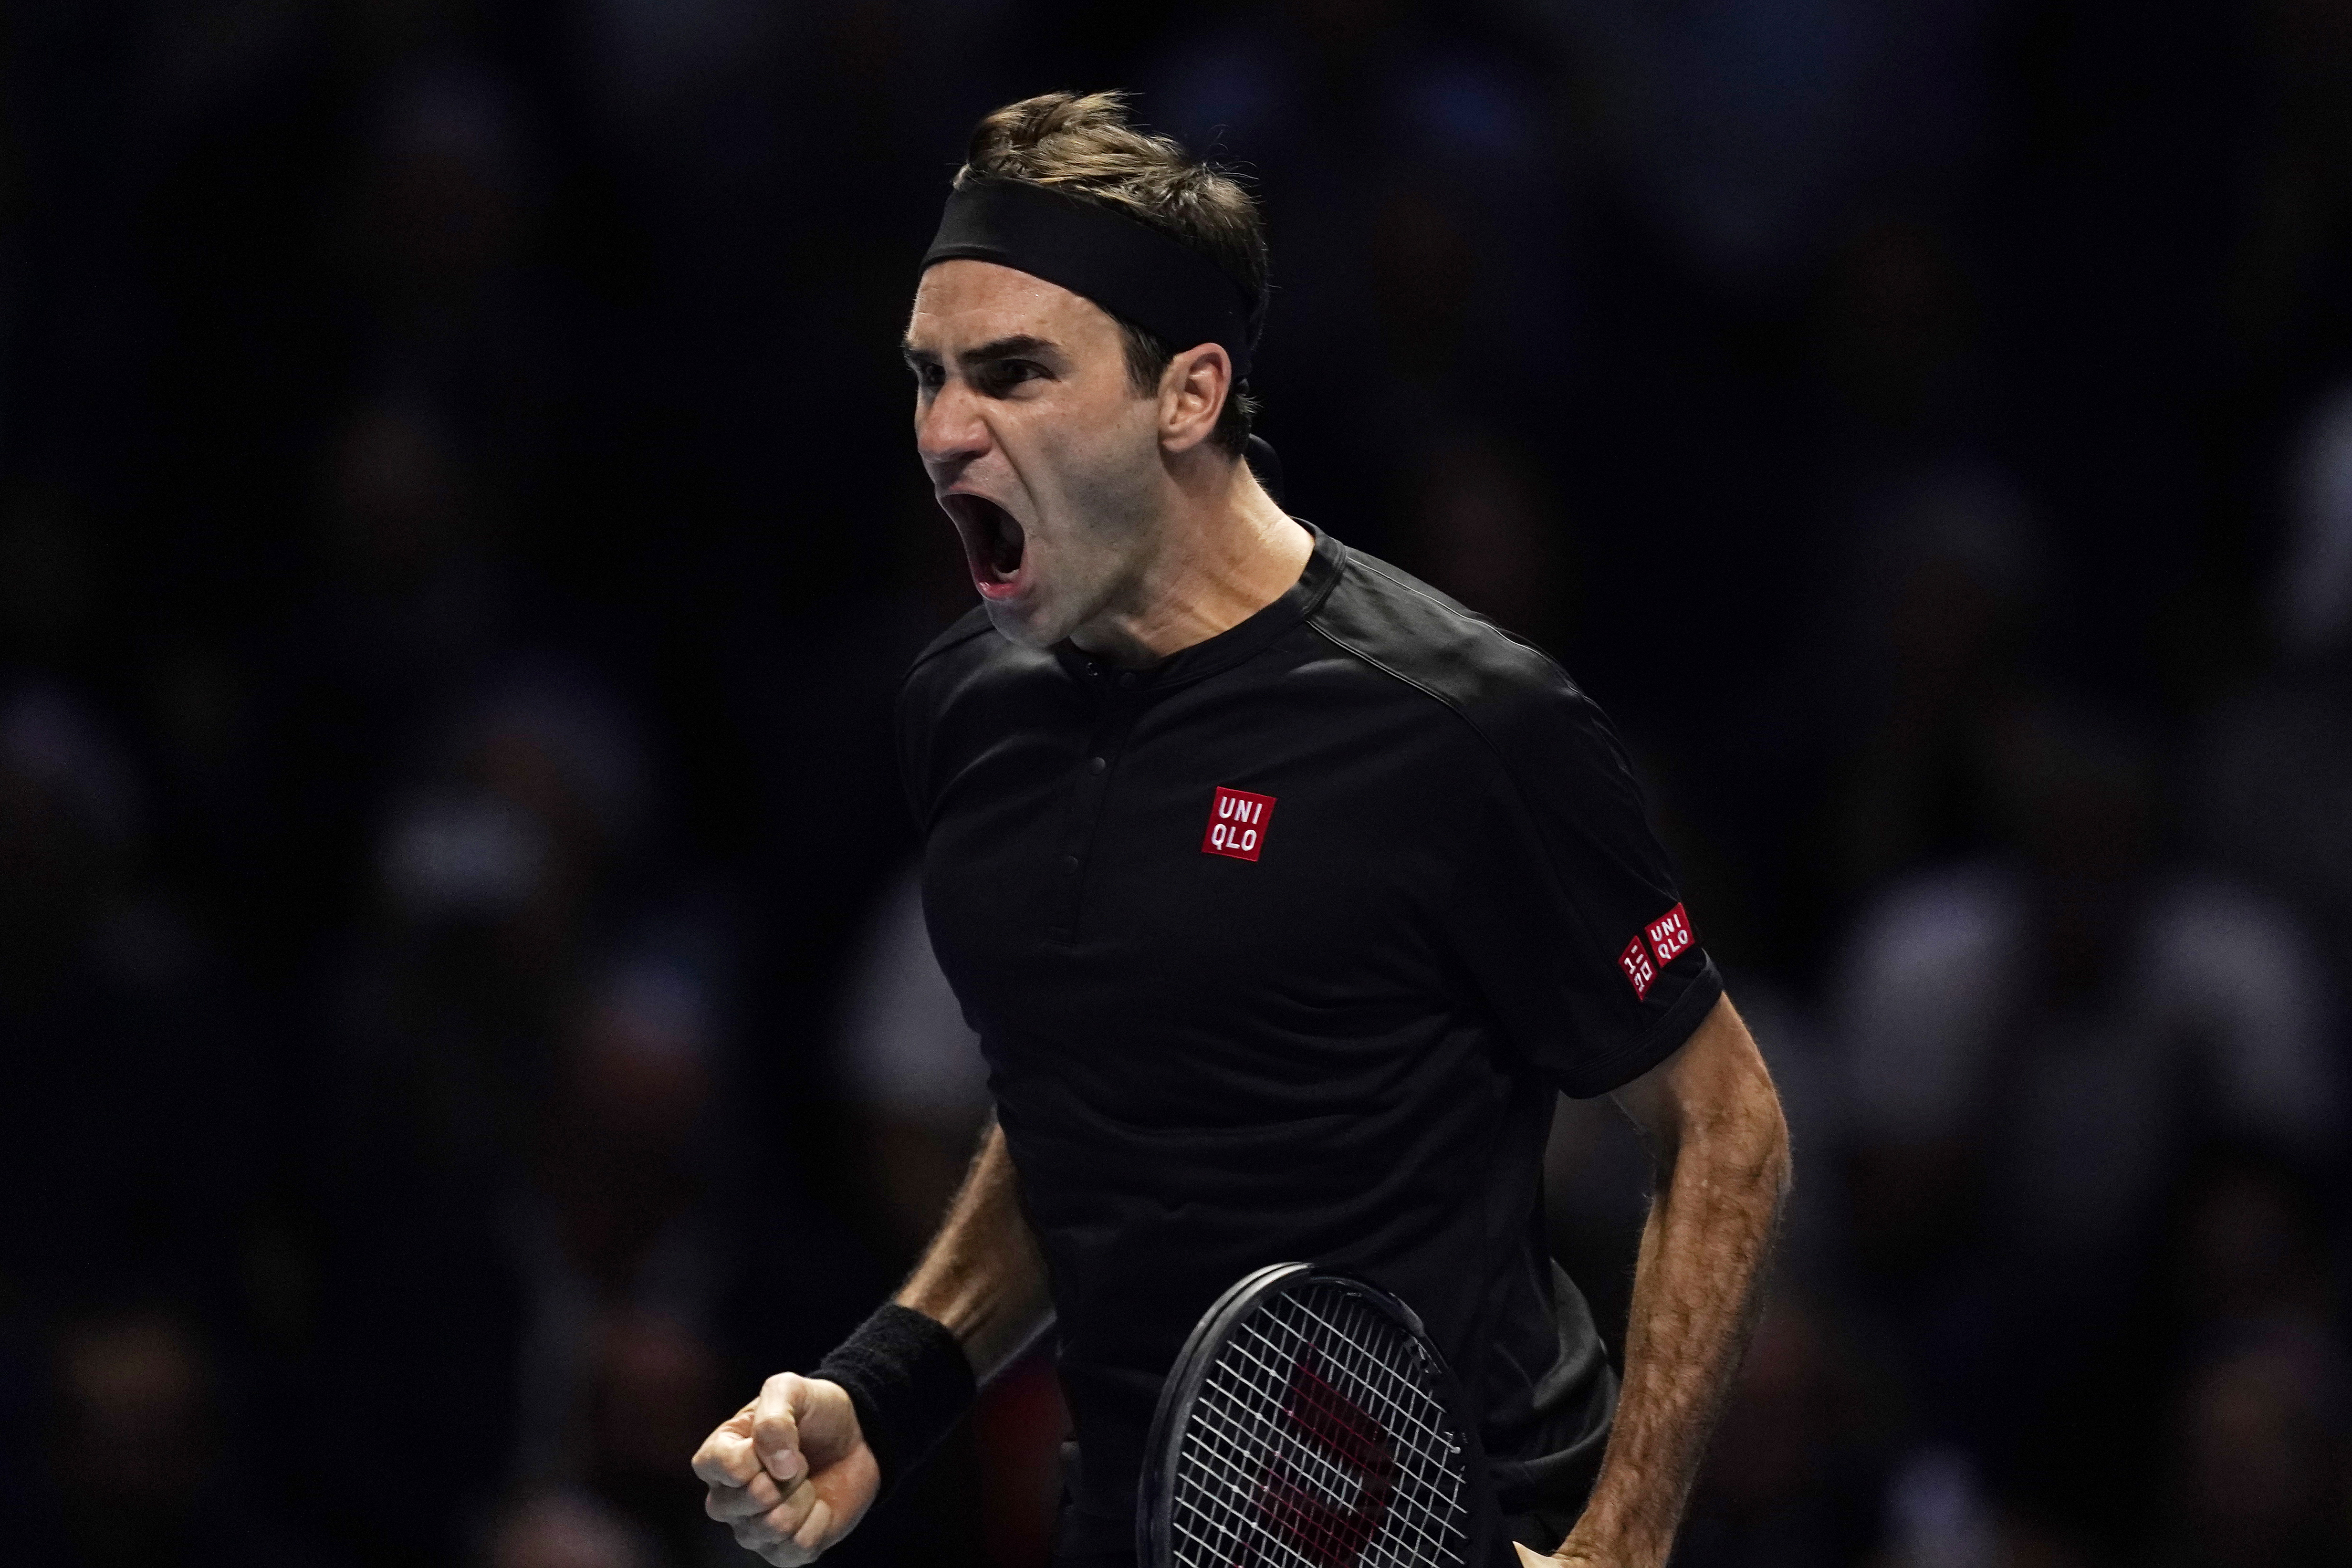 epa07997102 Roger Federer of Switzerland reacts after winning his round robing match against Novak Djokovic of Serbia at the ATP World Tour Finals tennis tournament in London, Britain, 14 November 2019.  EPA/WILL OLIVER